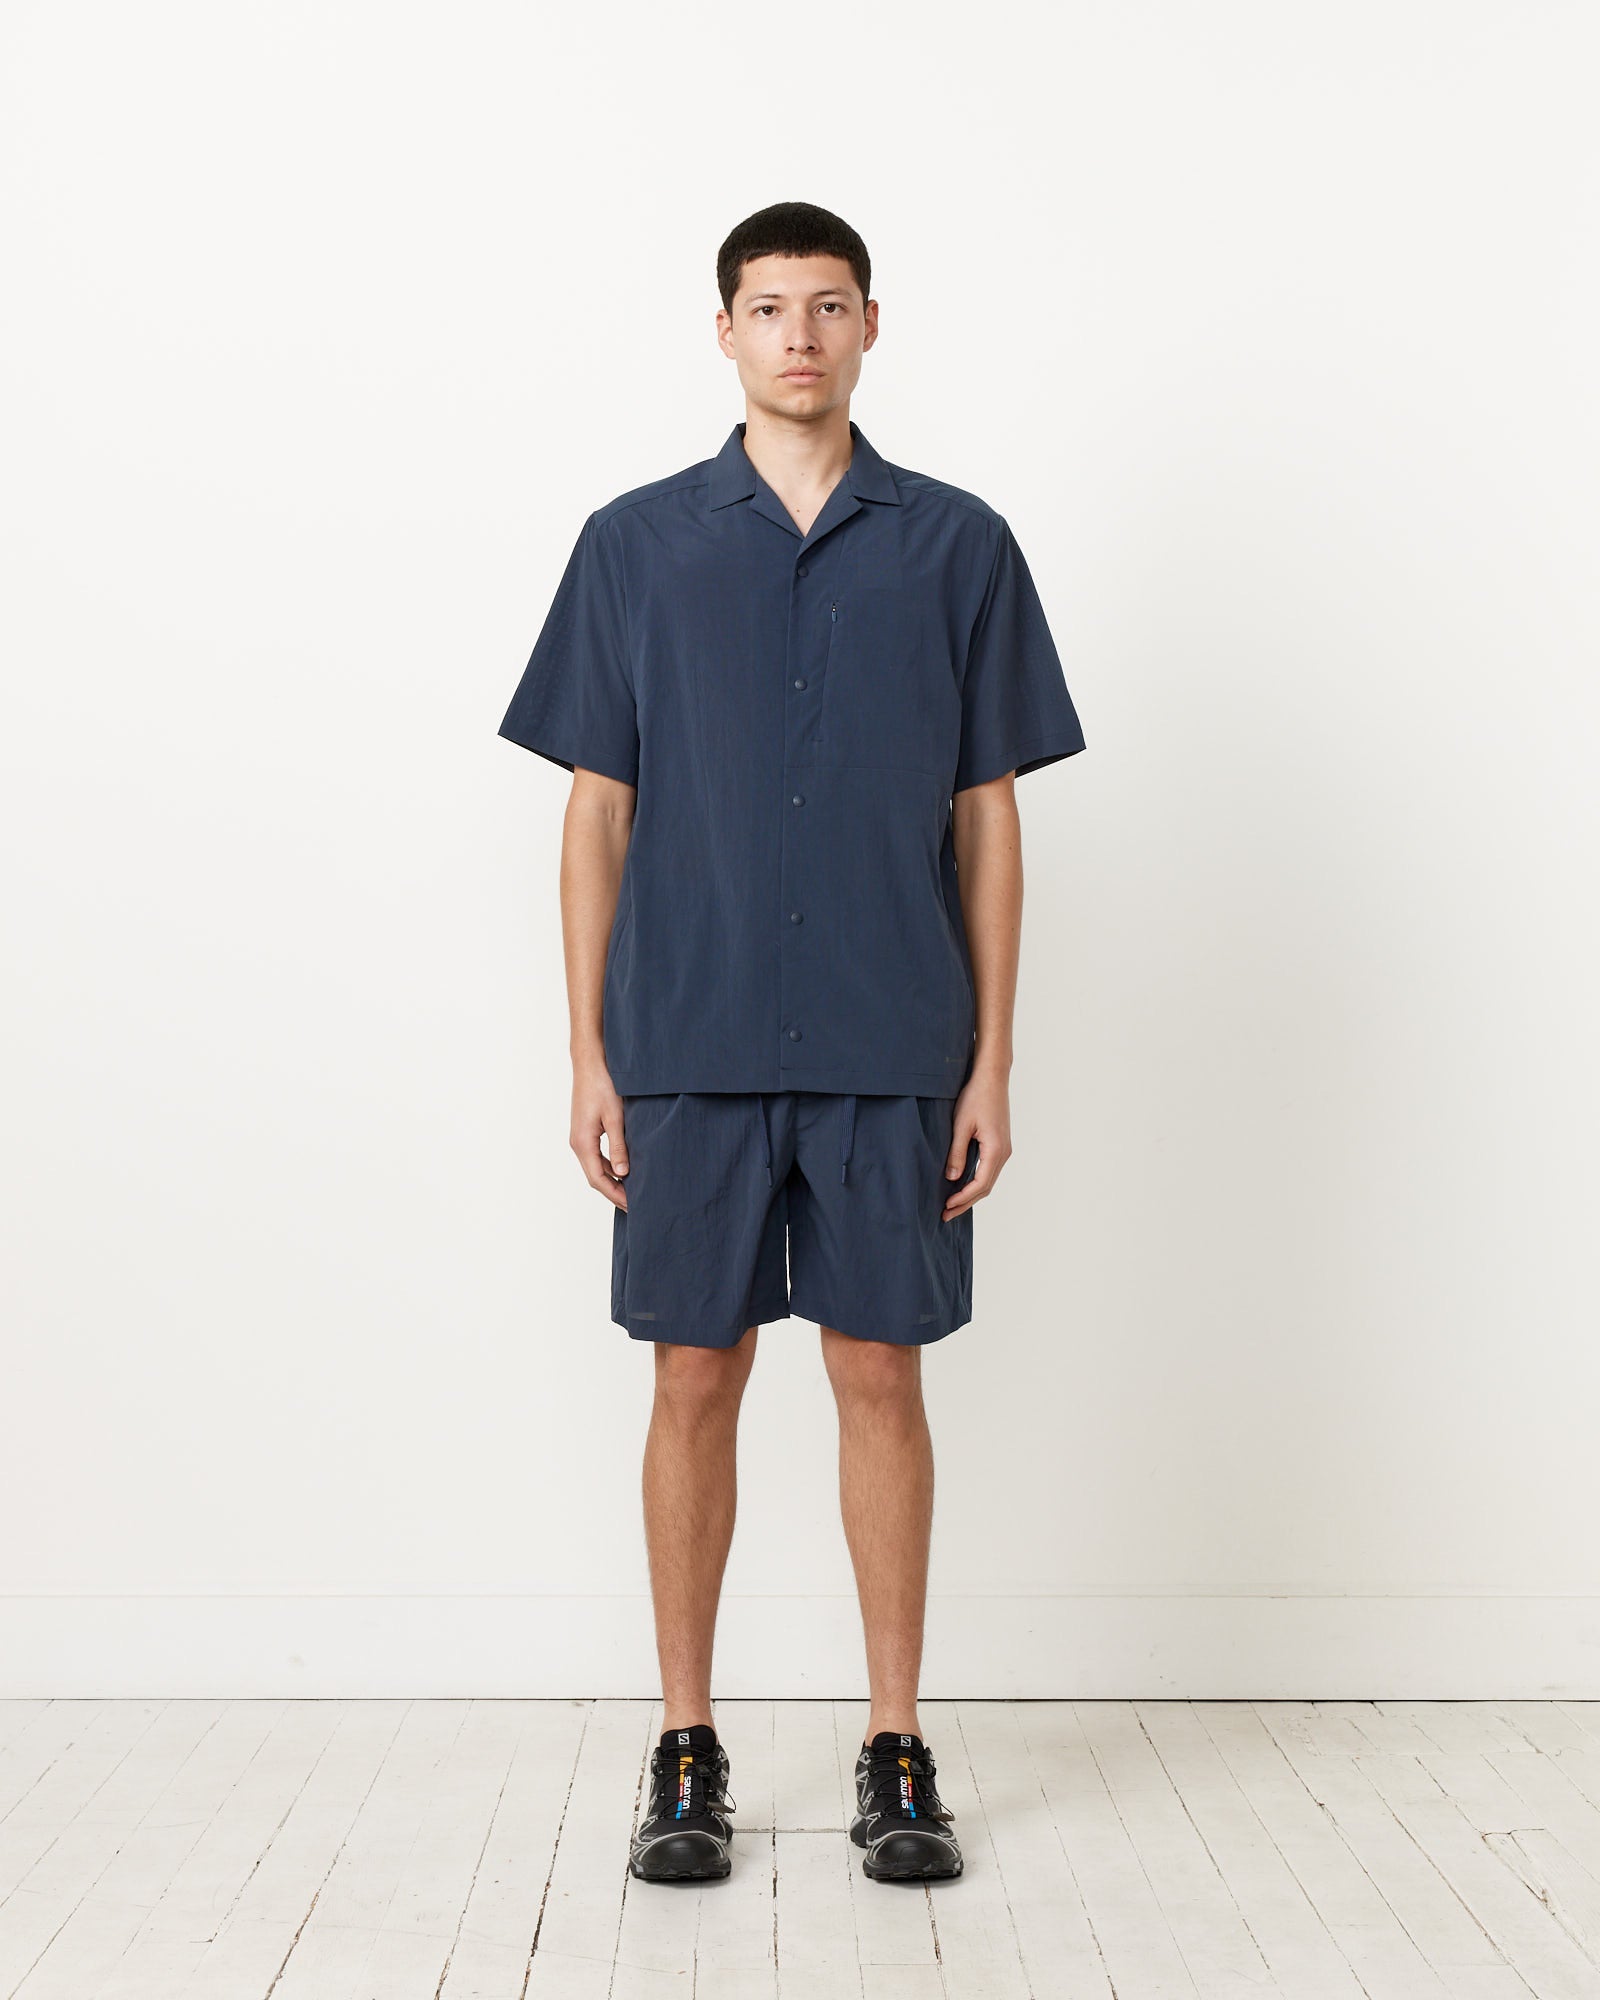 Breathable Quick Dry Shirt in Navy